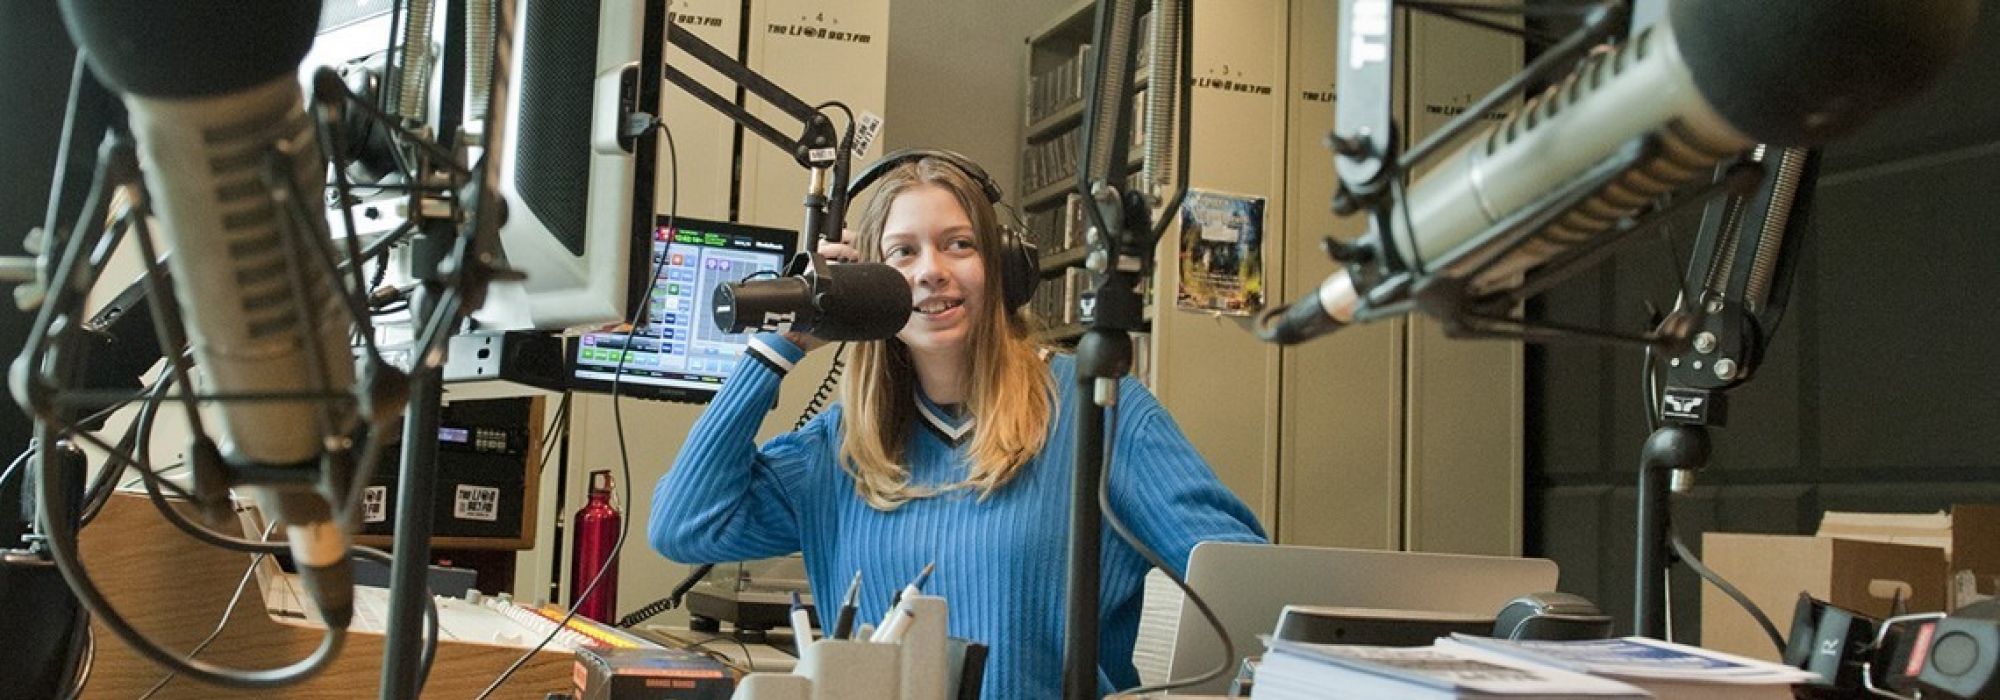 A blonde female student wearing a blue sweater stands surrounded by microphones in a recording studio